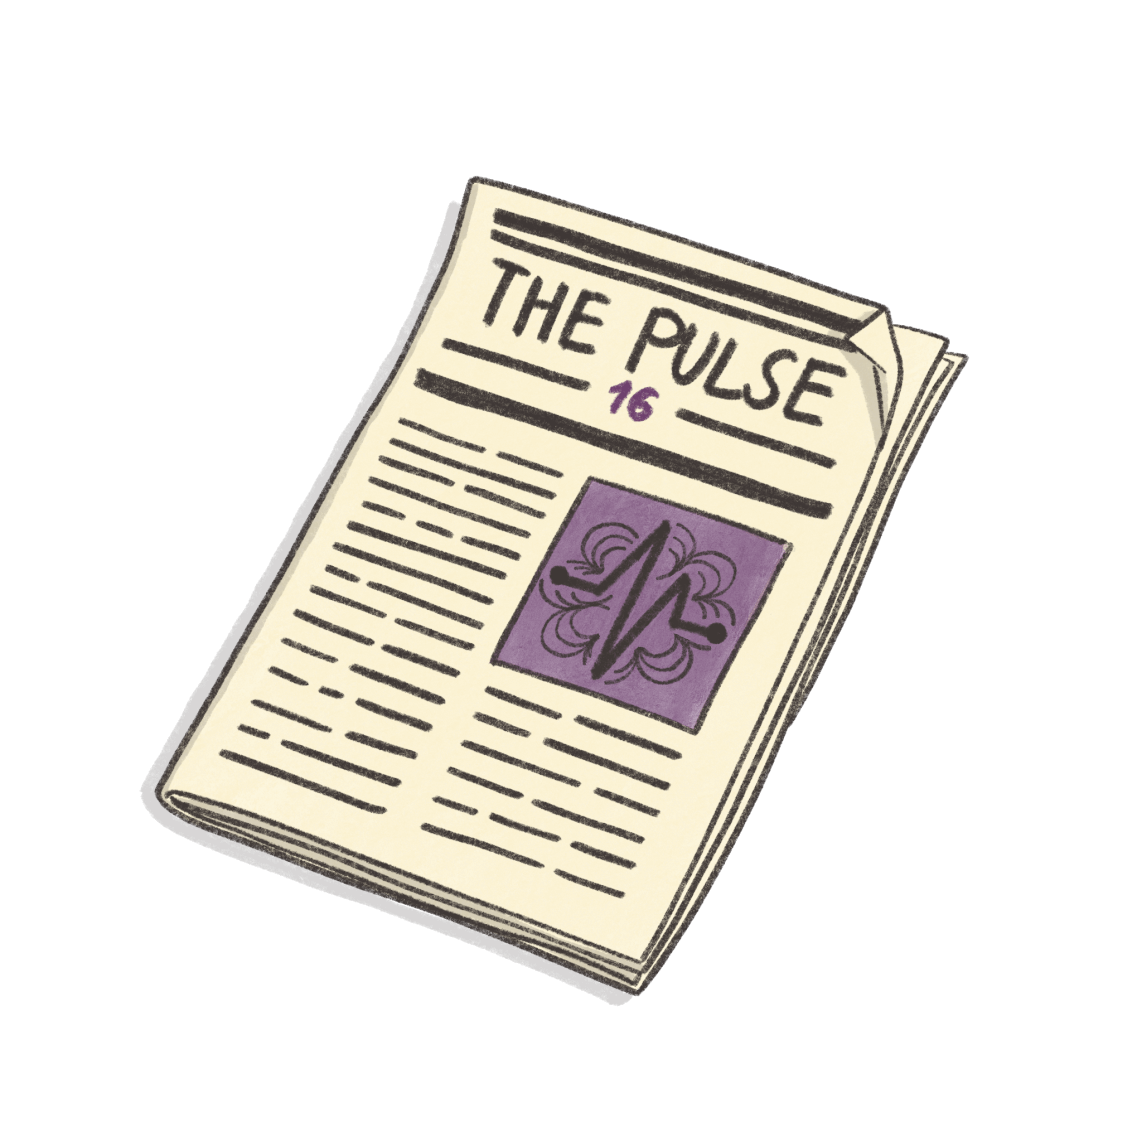 The Apoio Pulse – Issue 16